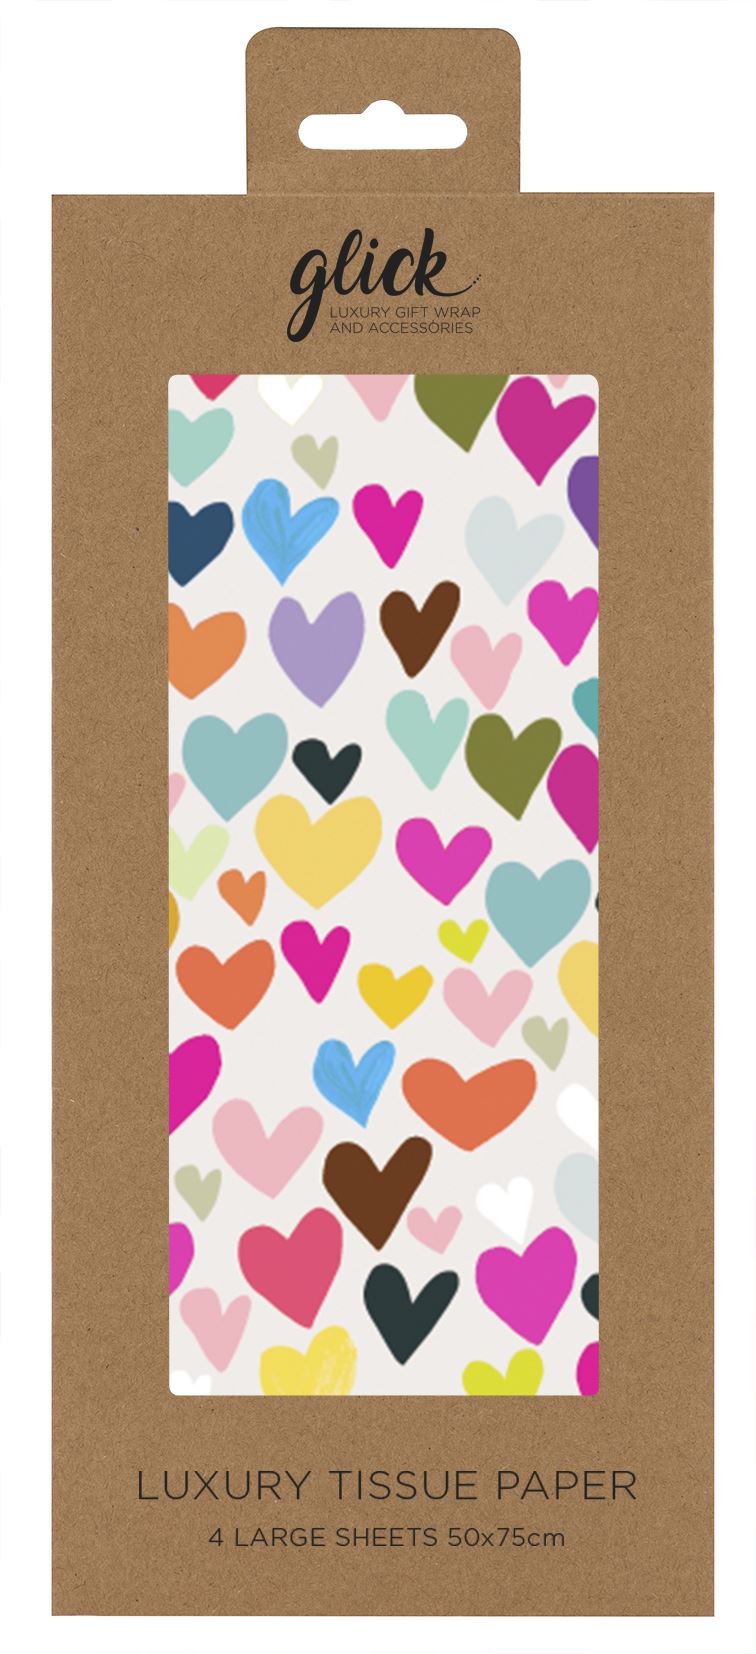 Retail packaging for a rectangular sheet of tissue paper covered in a multitude of different sized and coloured hearts. The hearts are not uniform.